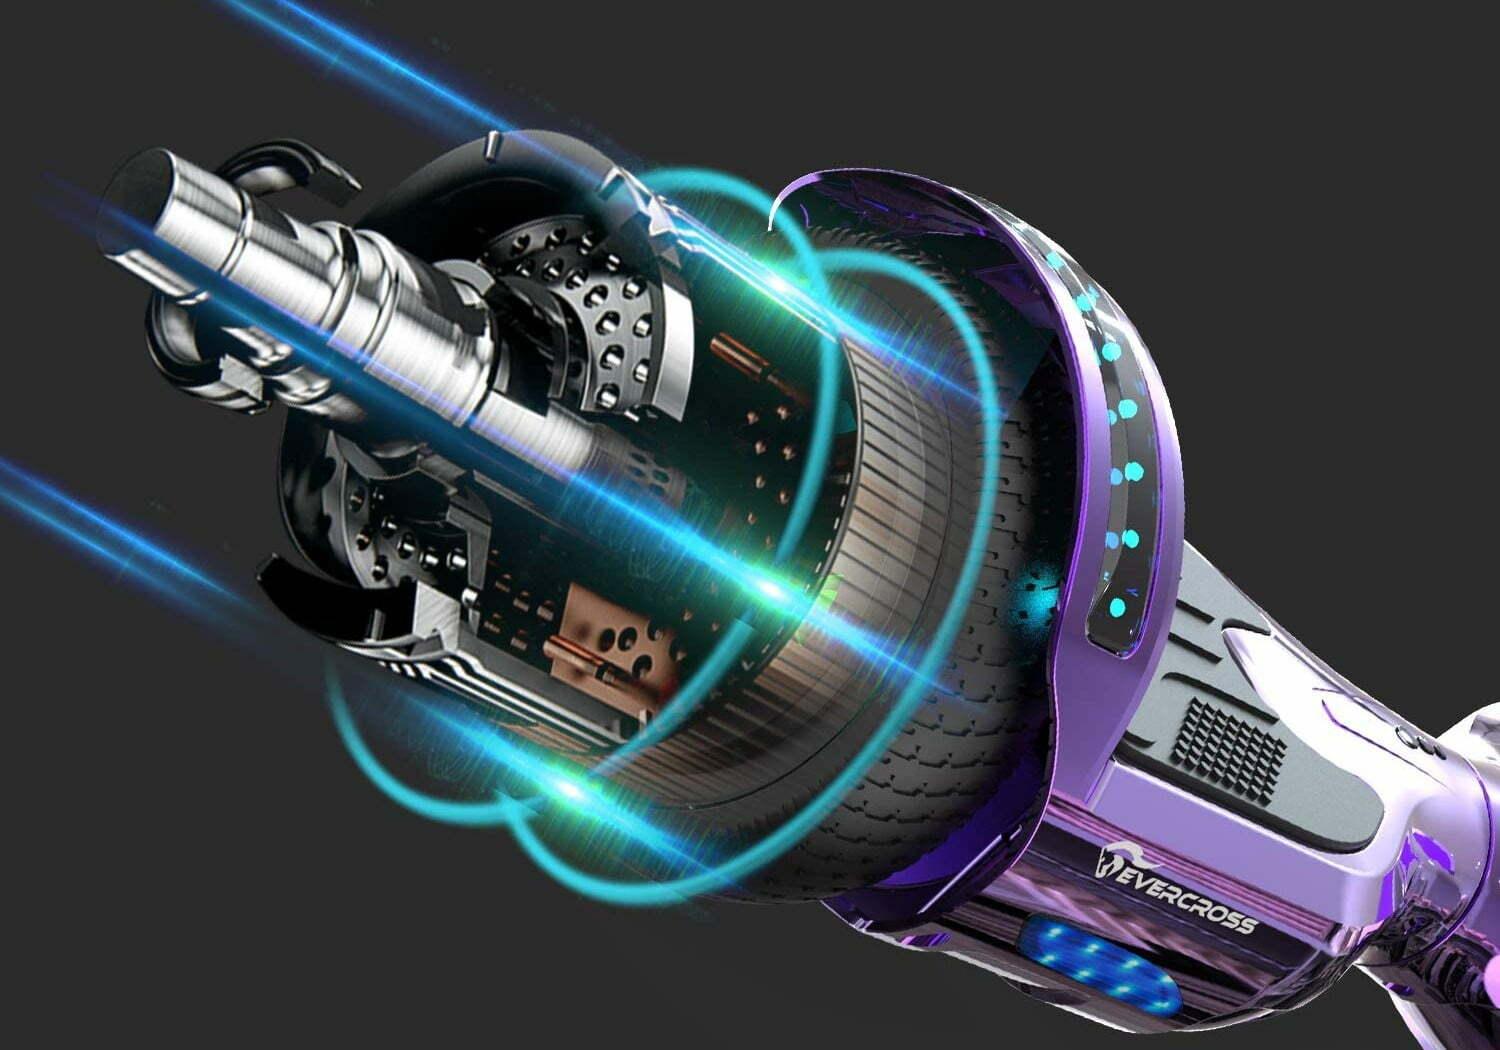 What Kind of Motors are in Hoverboards?